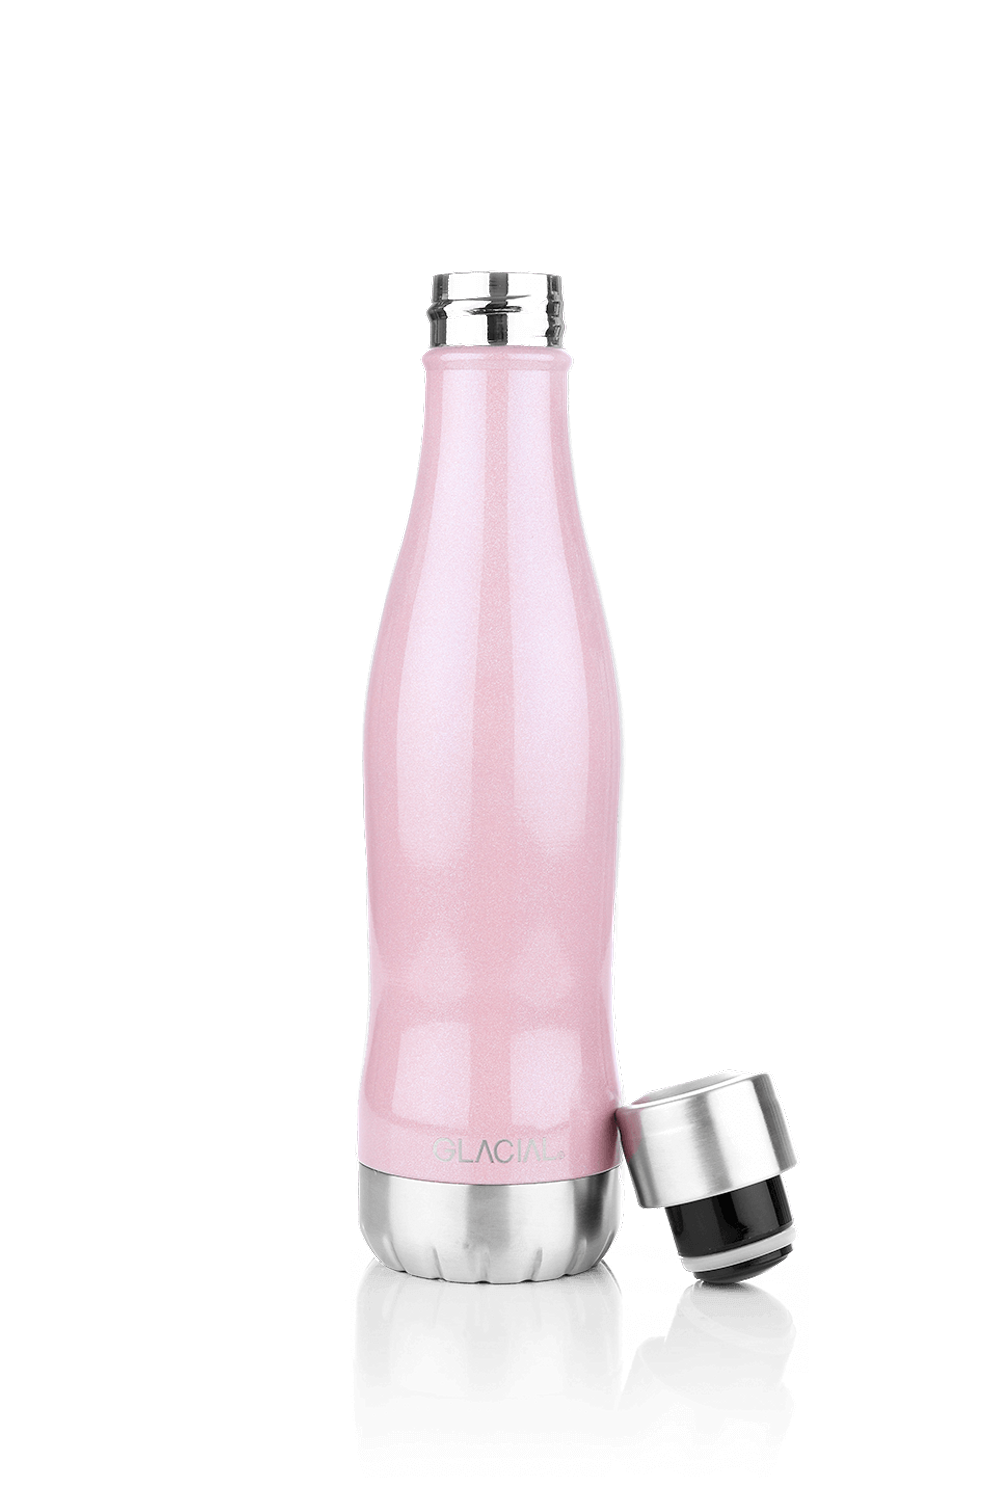 Glacial Pink Pearl 400ml Bottle